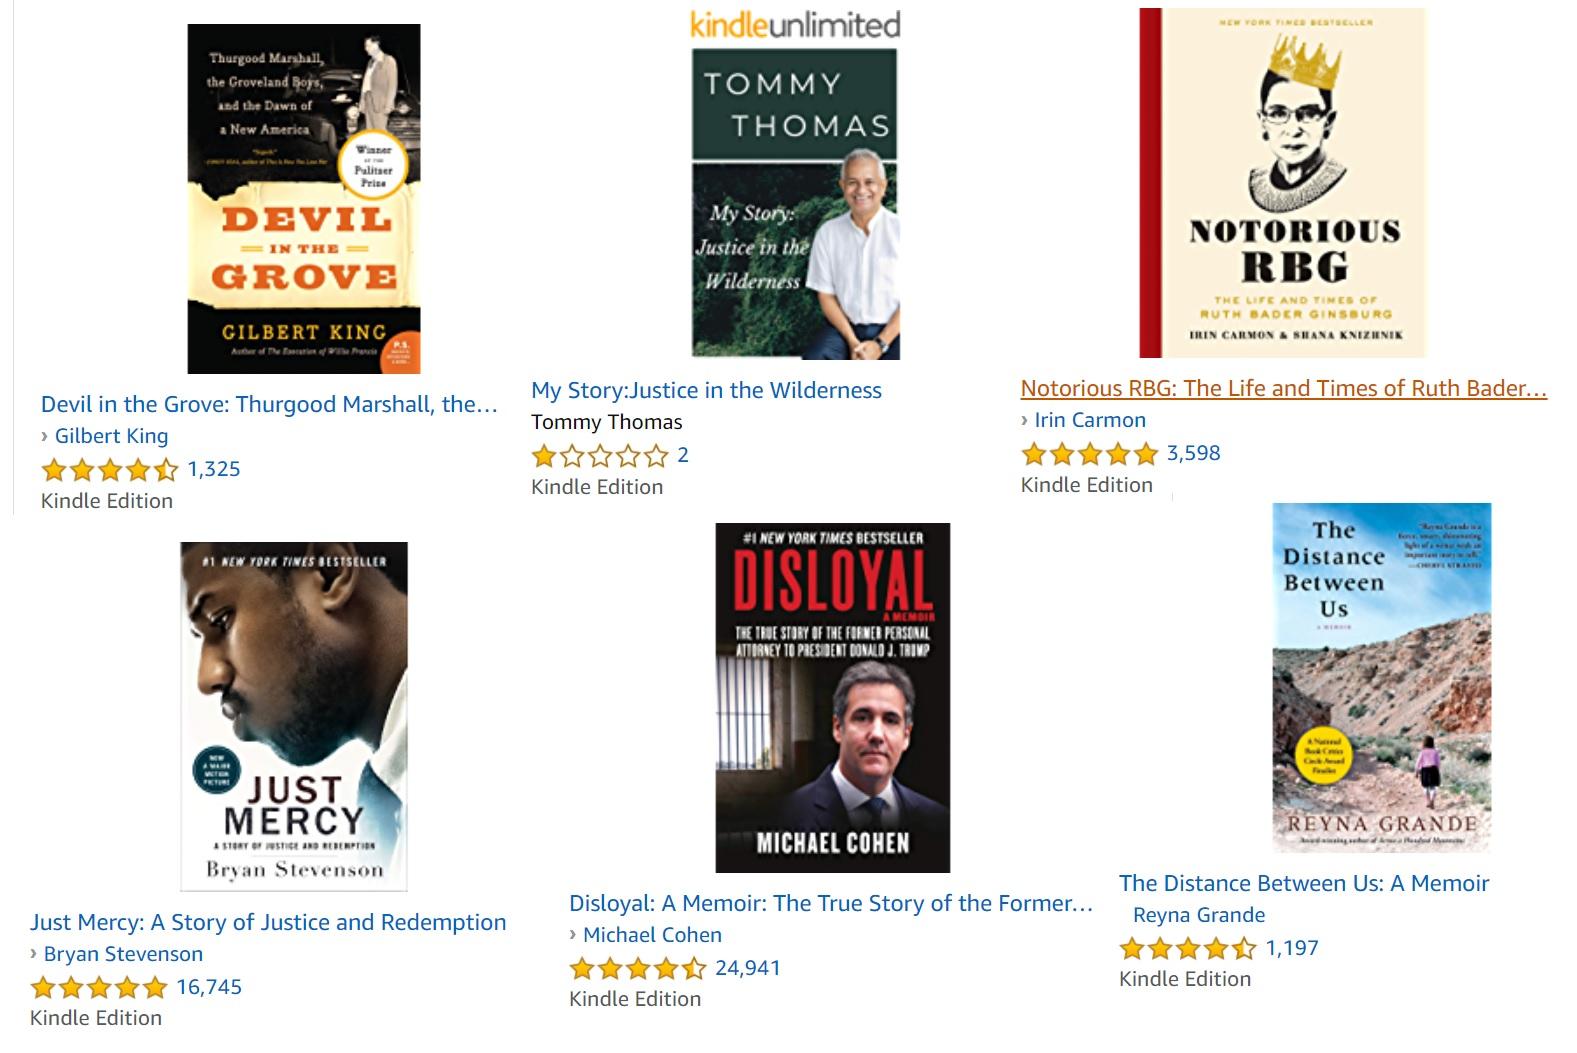 Former attorney-general Tommy Thomas' recently published autobiography is available on Amazon's e-book store but unlike other listings in the category of 'Biographies of lawyers and & judges', it has been given a mere one-star rating as well as poor reviews by readers.